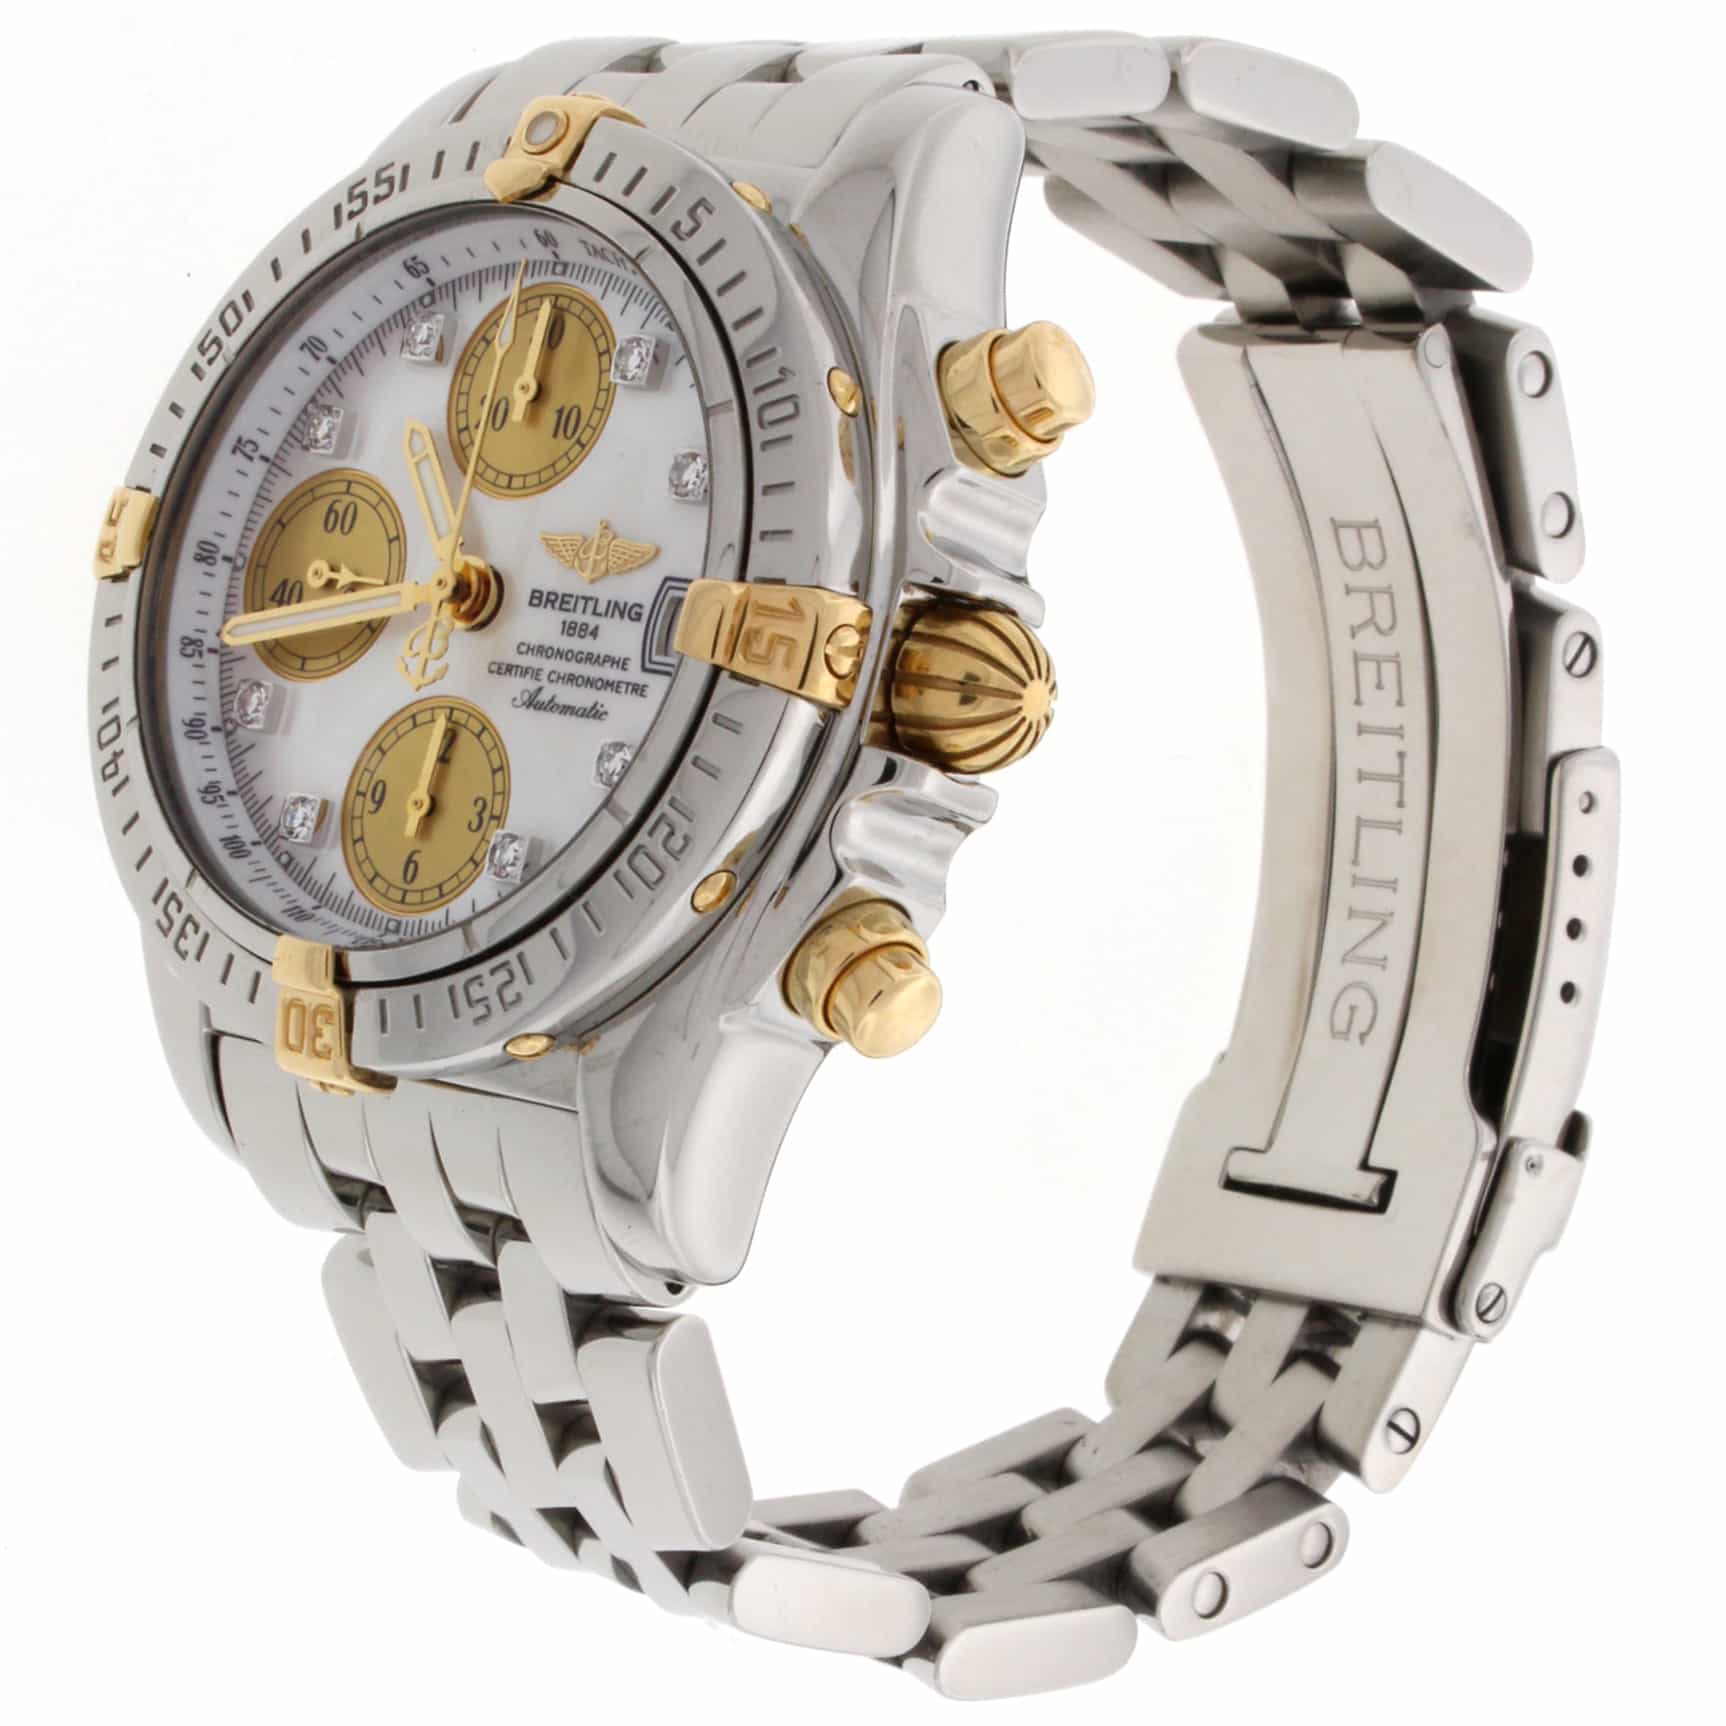 Breitling Chrono Cockpit 2-Tone 18K Yellow Gold & Stainless Steel Moth ...